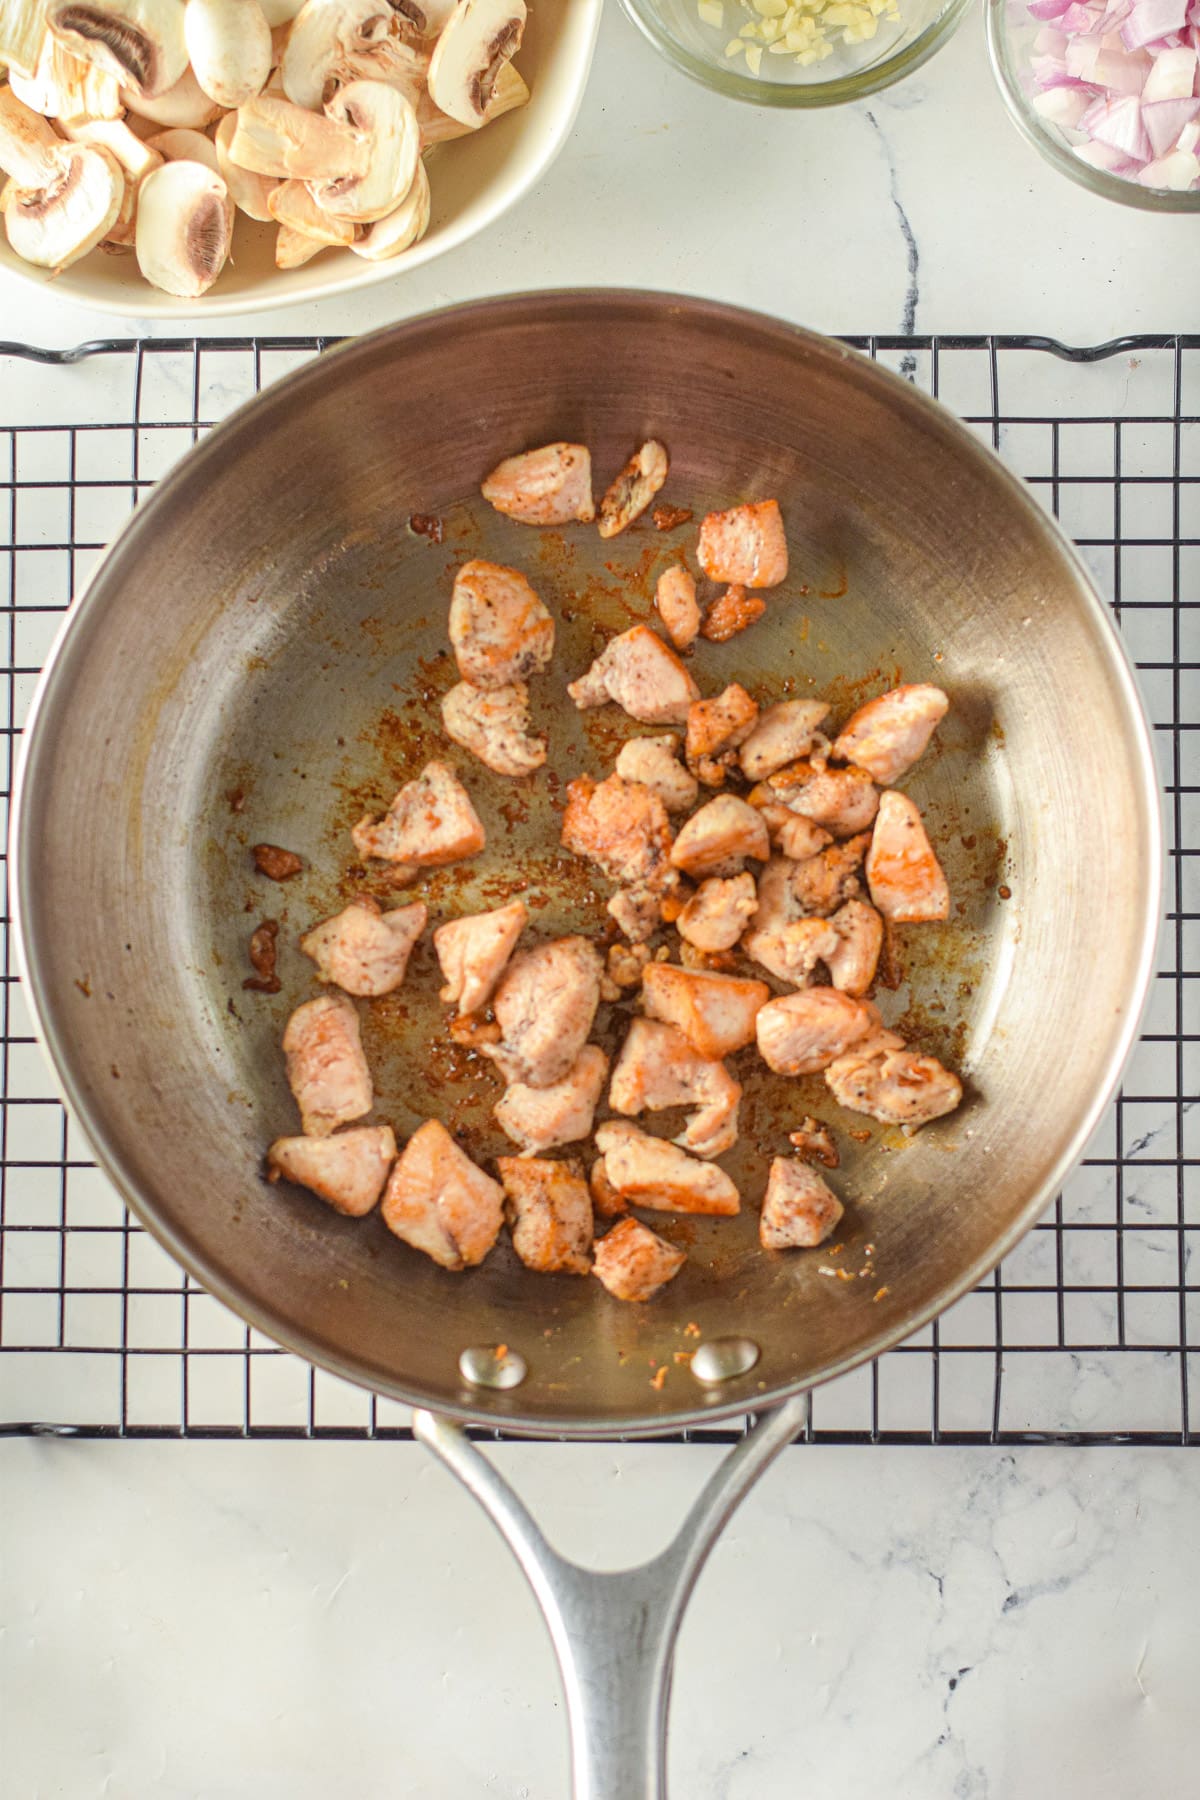 Chicken pieces cooking in pan